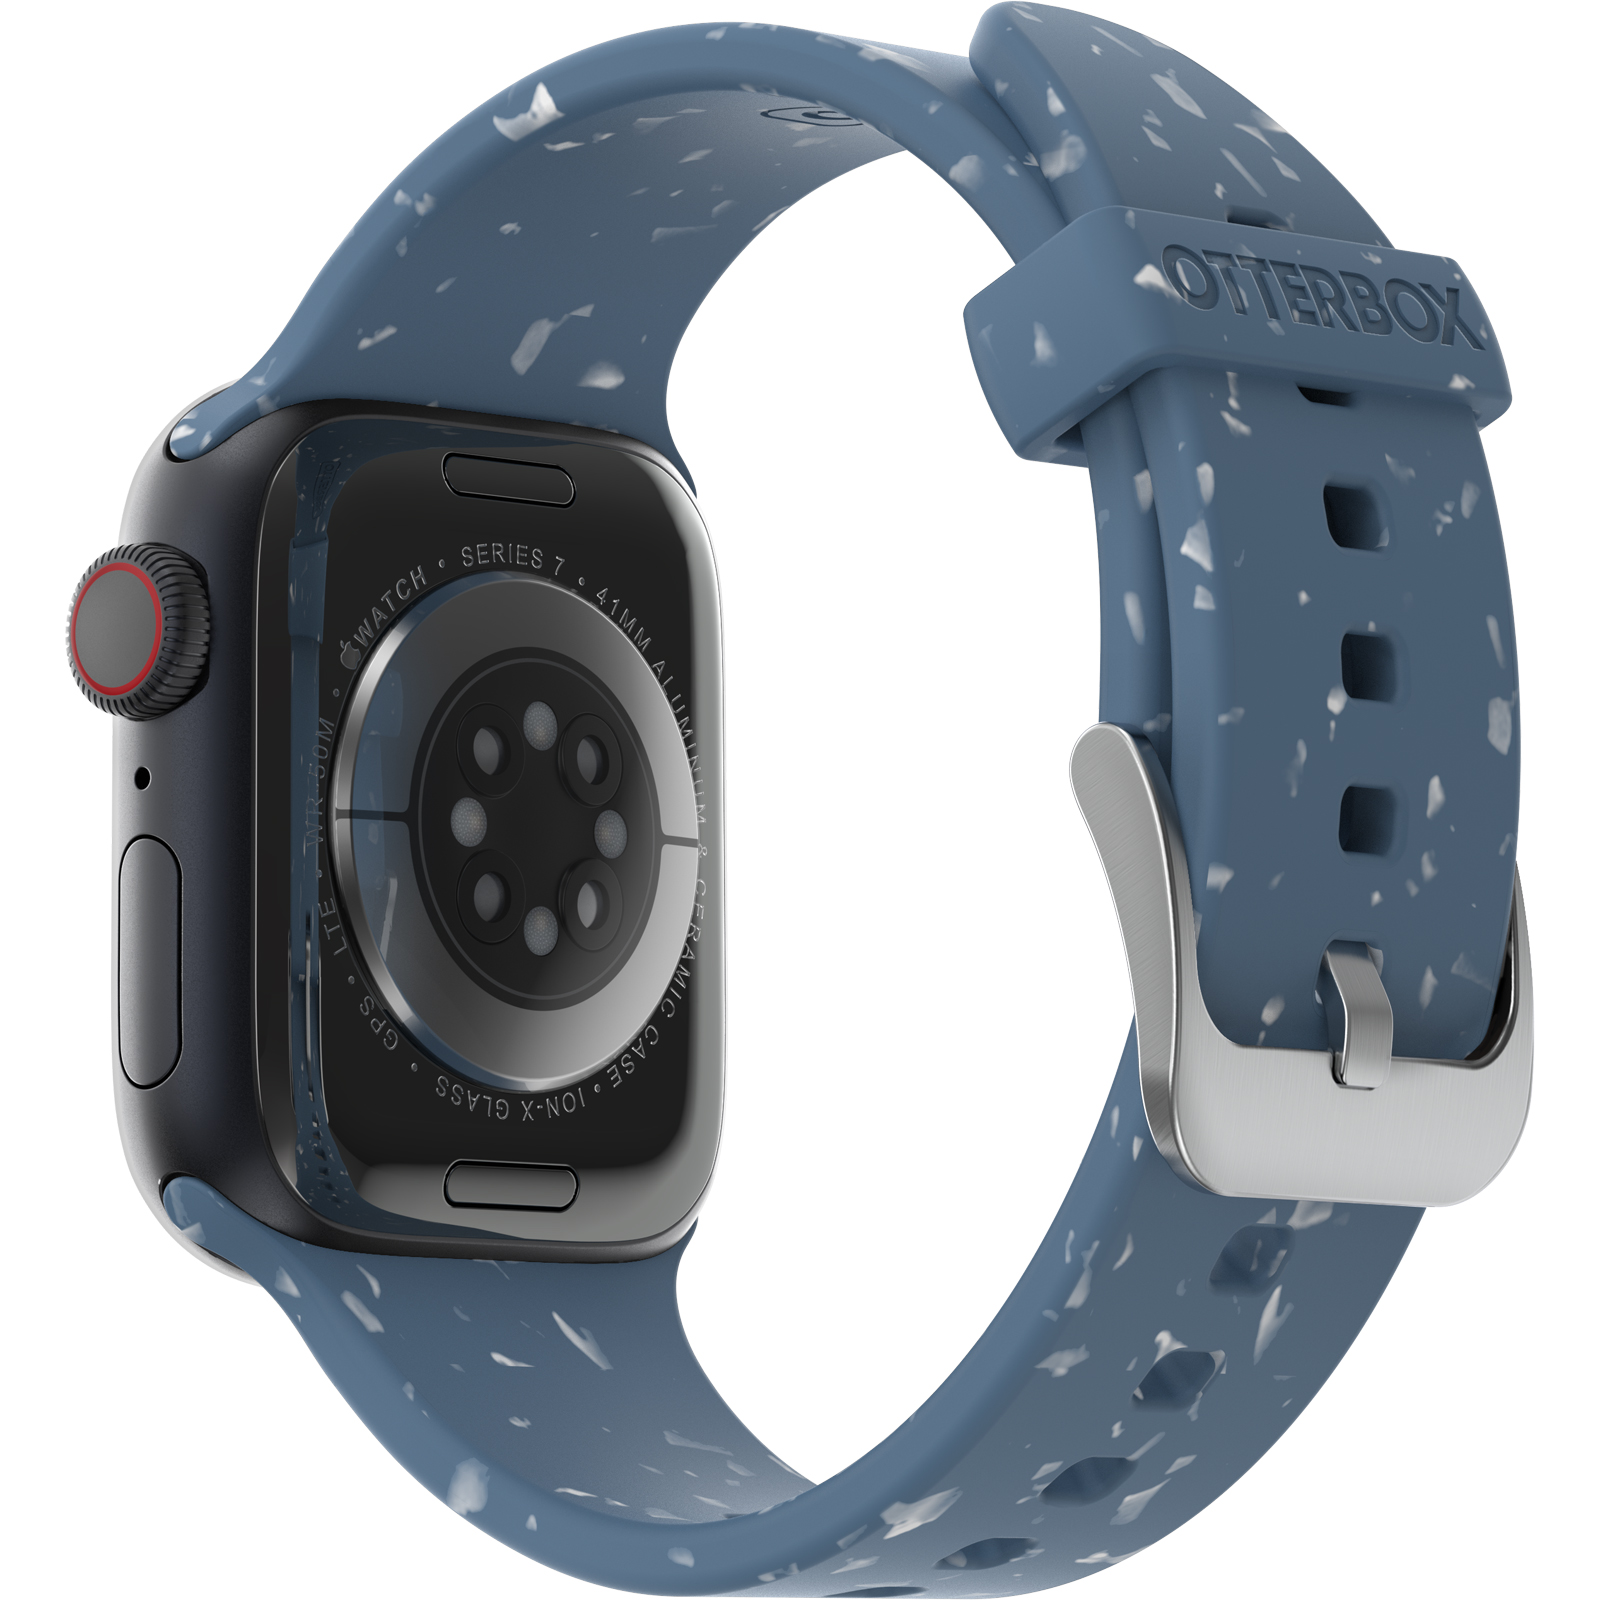 Blue Apple Watch wristband less landfill for that leaves the